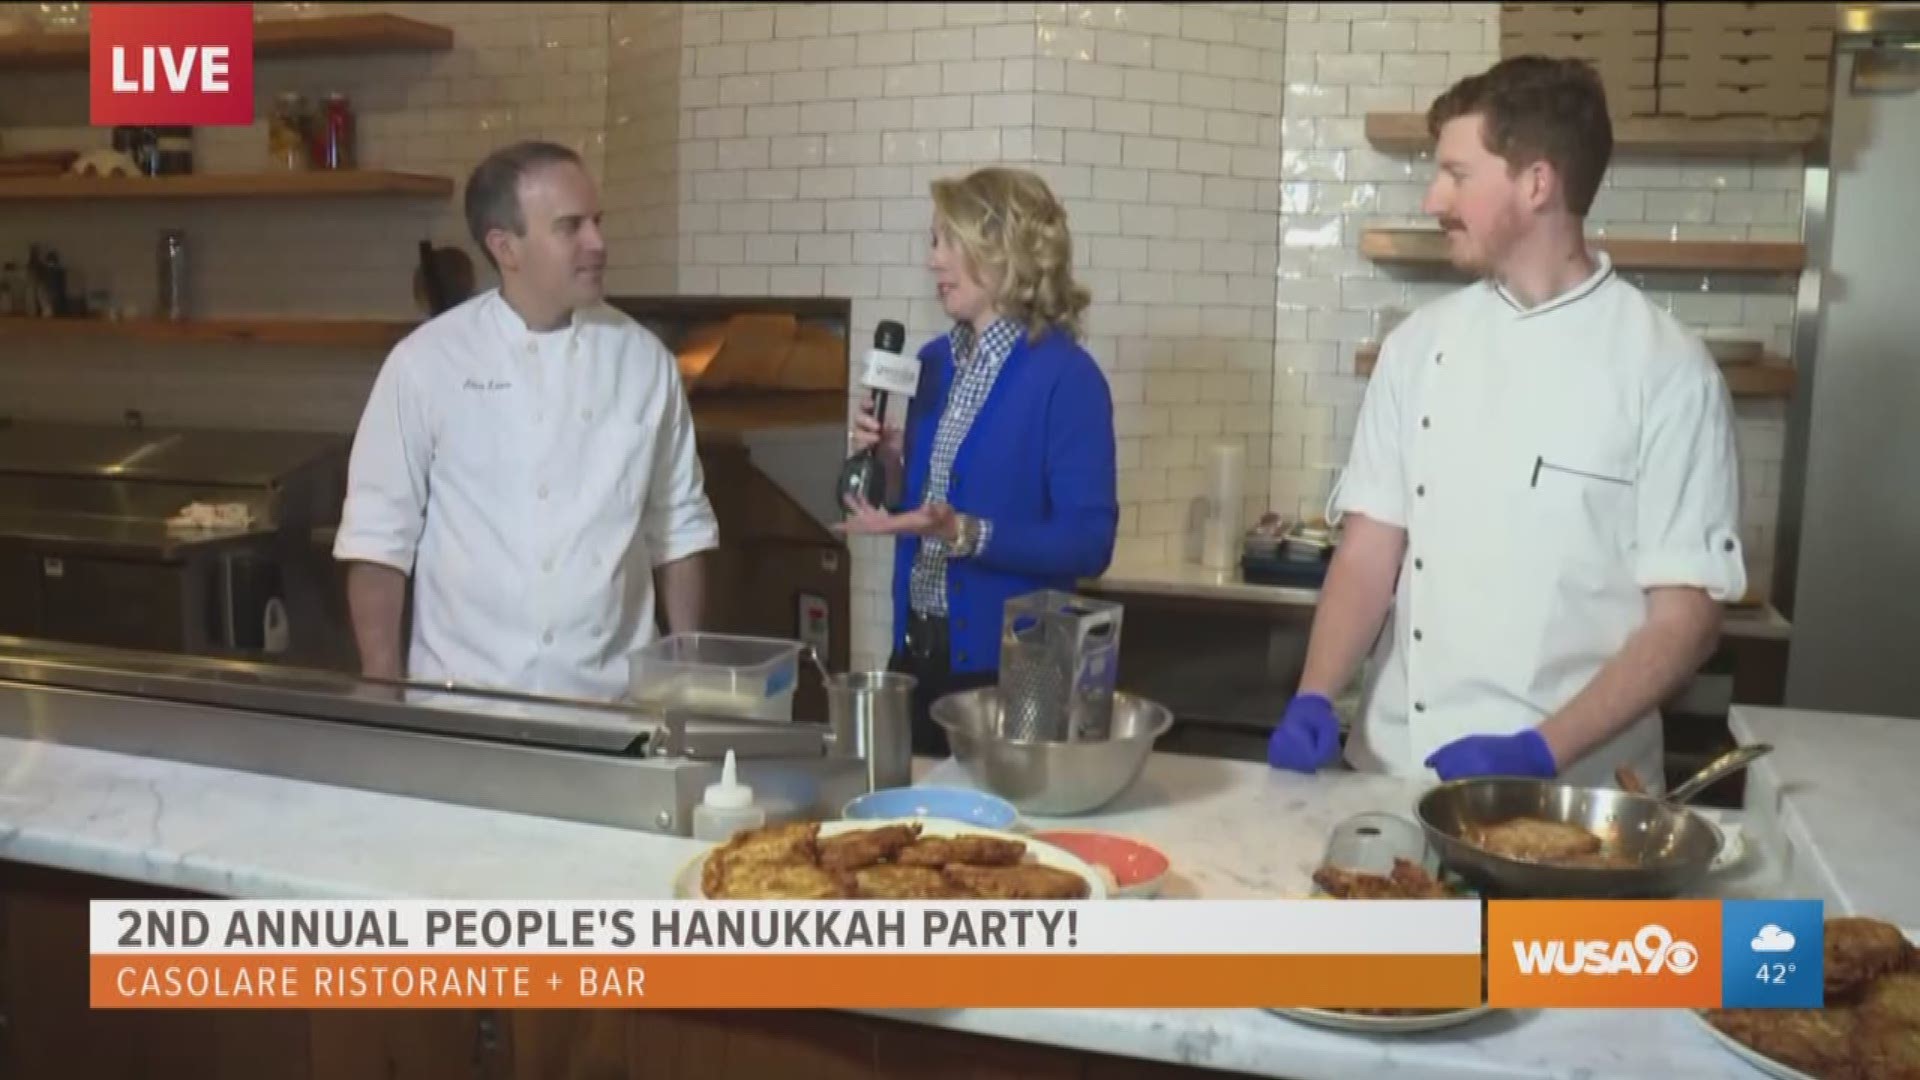 Andi Hauser gets a first look at a unique Hanukkah celebration with Chef Alex Levin